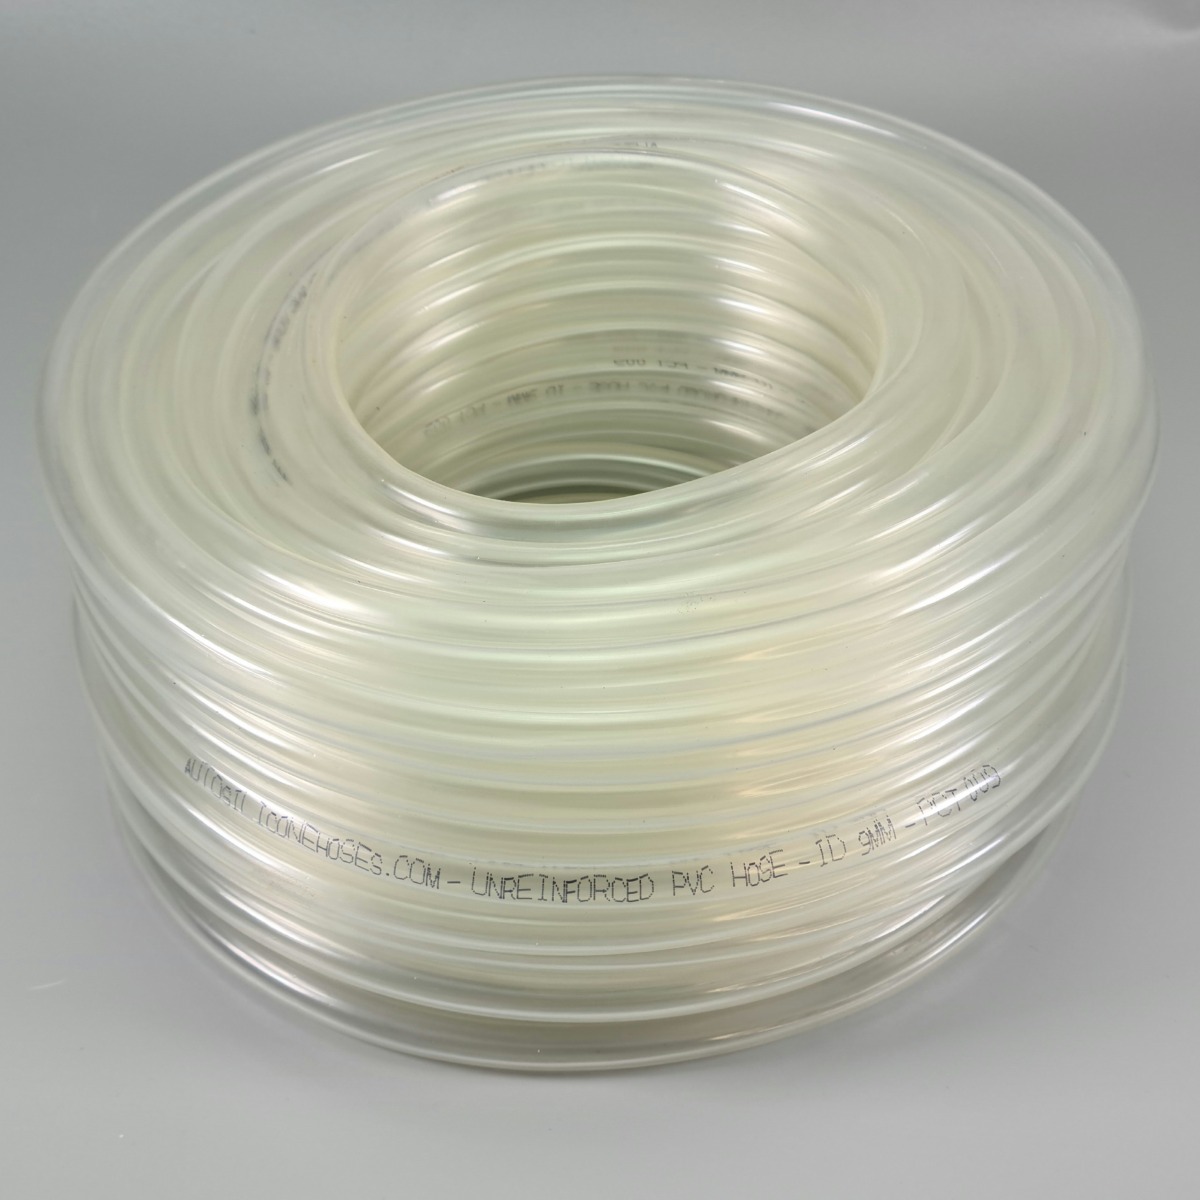 Kesoto Clear Translucent Plastic PVC Tubing Hose Pipe for Water Air Pump 9.8 Ft Long, 10 mm Inner Dia 